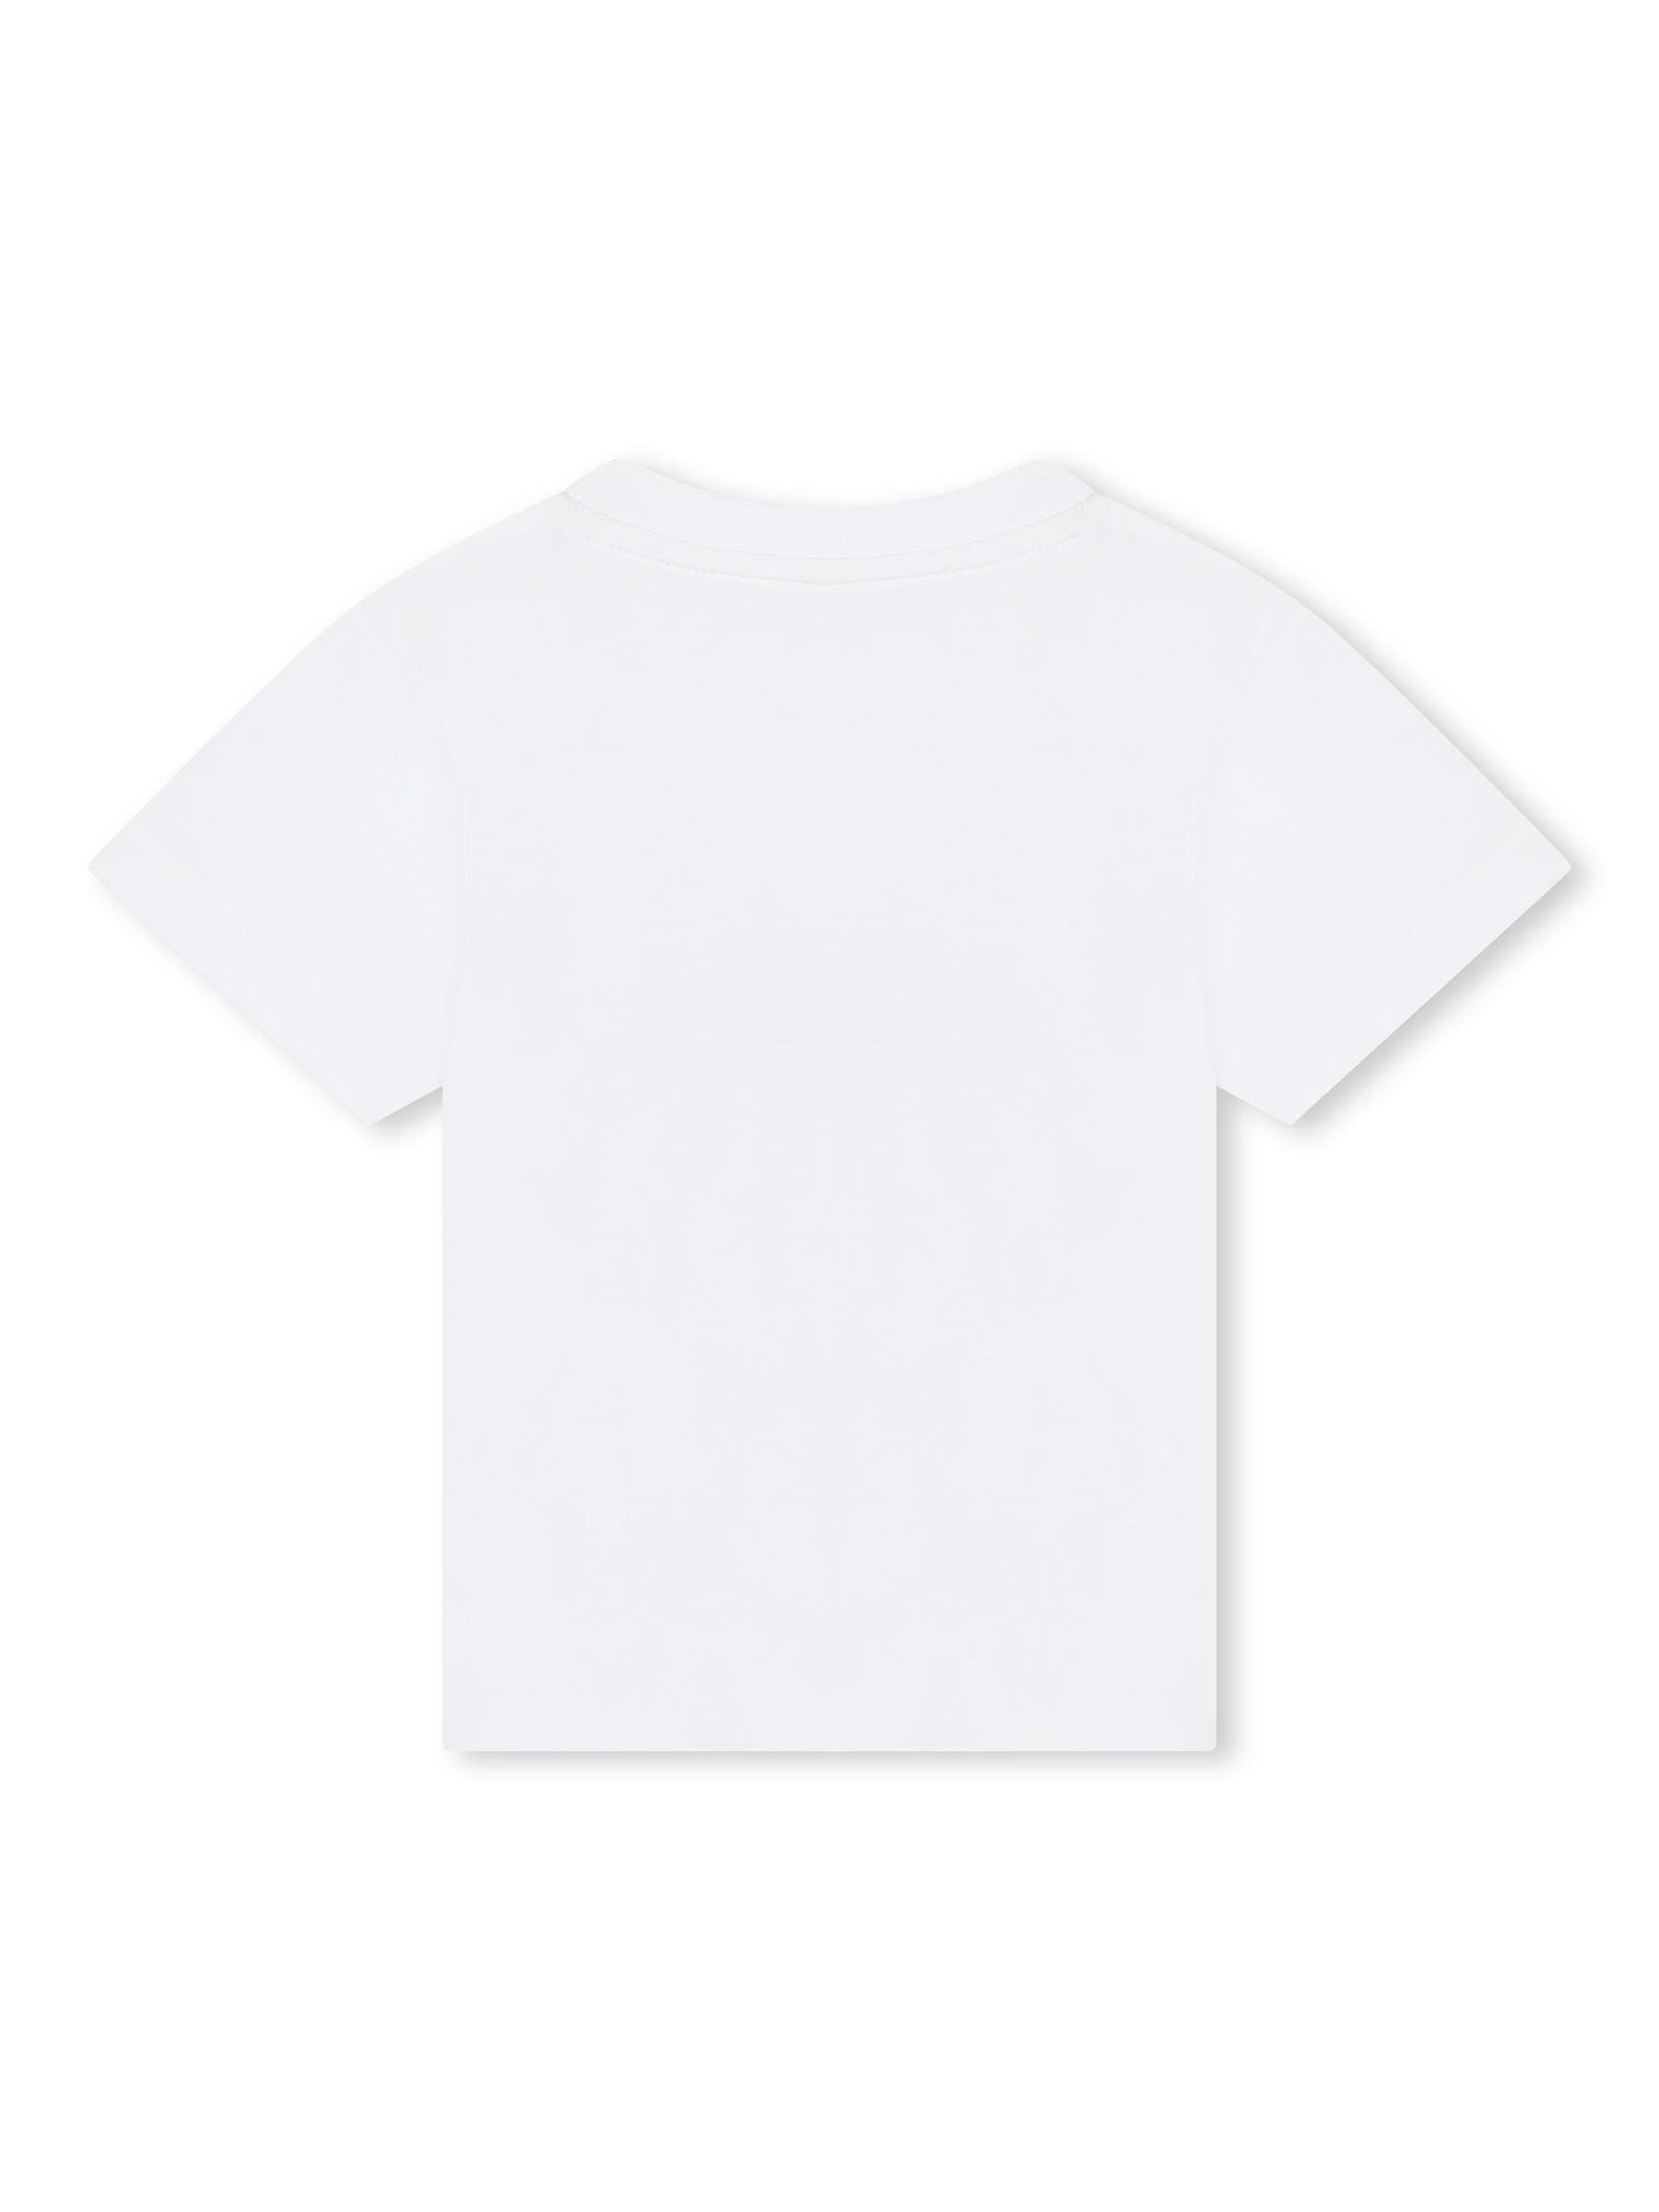 Buy Timberland Baby Follow The Trees Logo T-Shirt, White Online at johnlewis.com